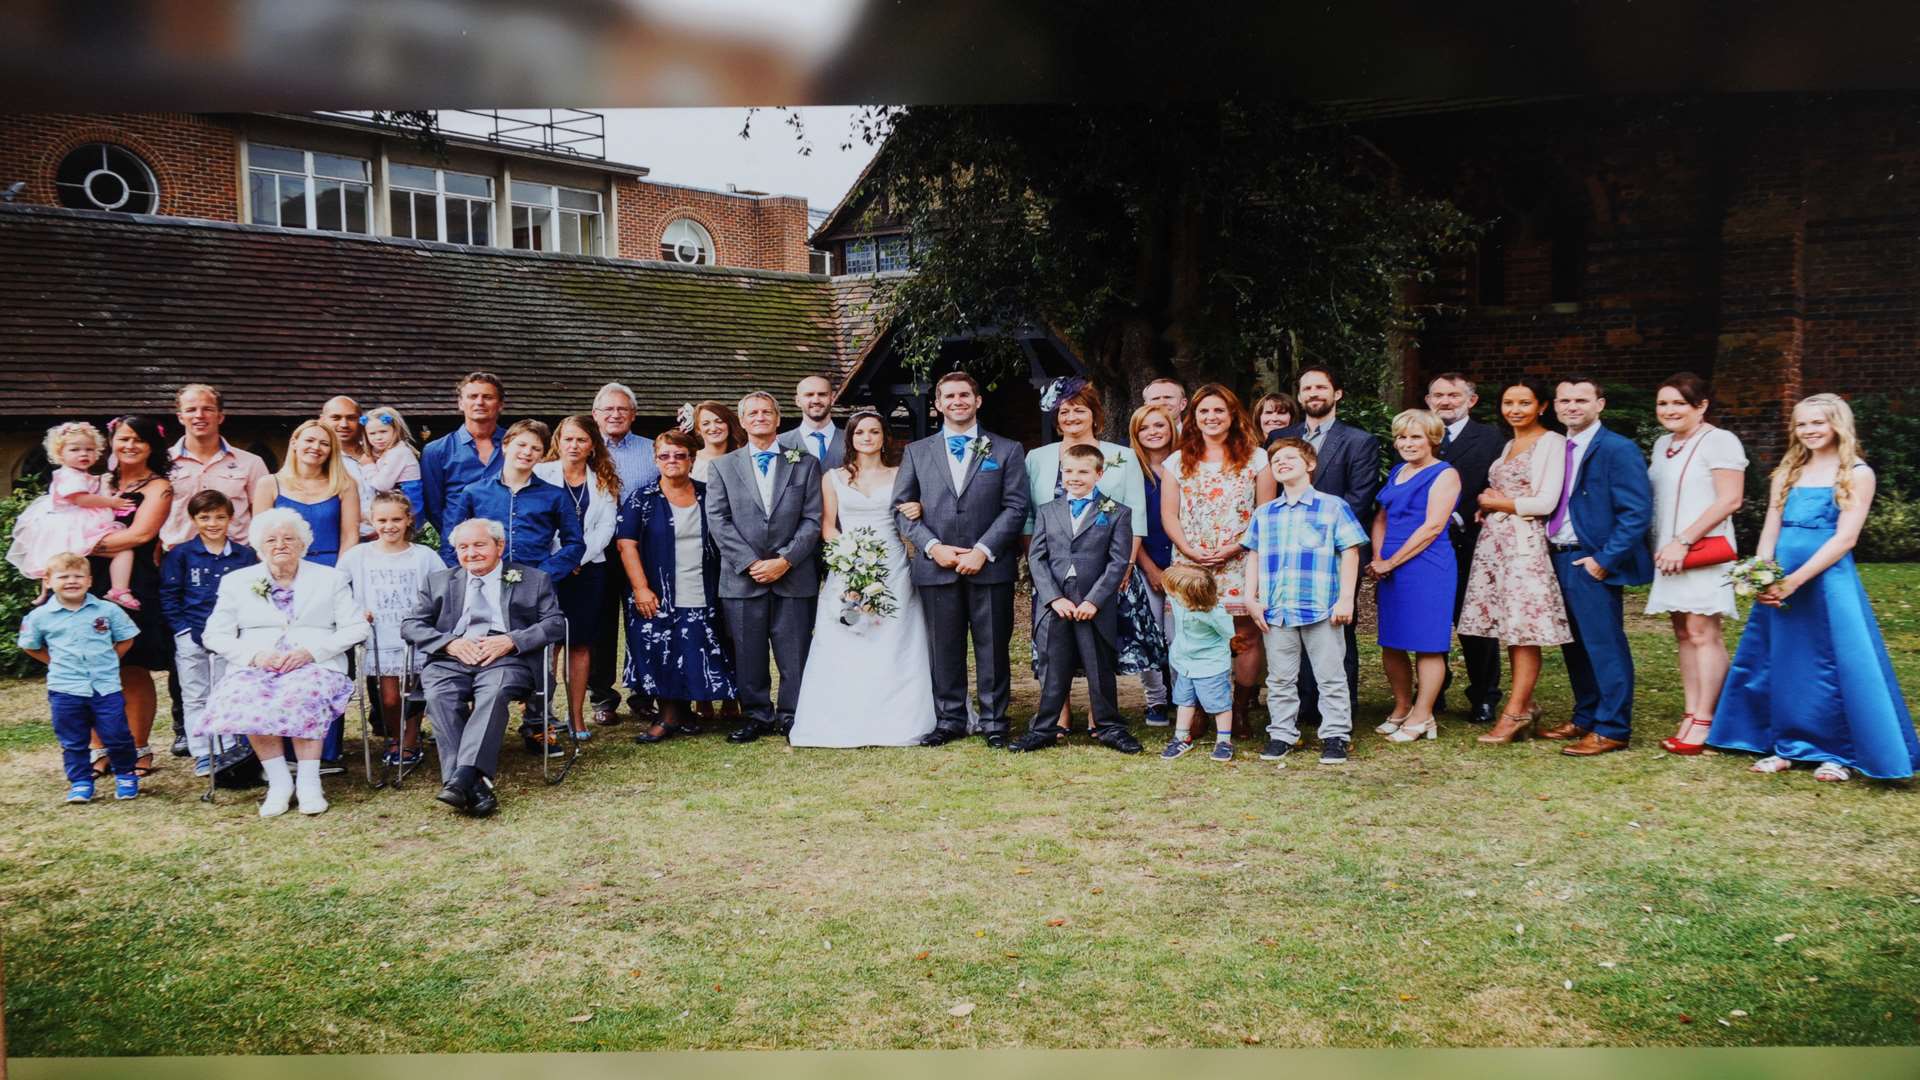 The Bewley family at Les and Iris's granddaughter's wedding in August 2014